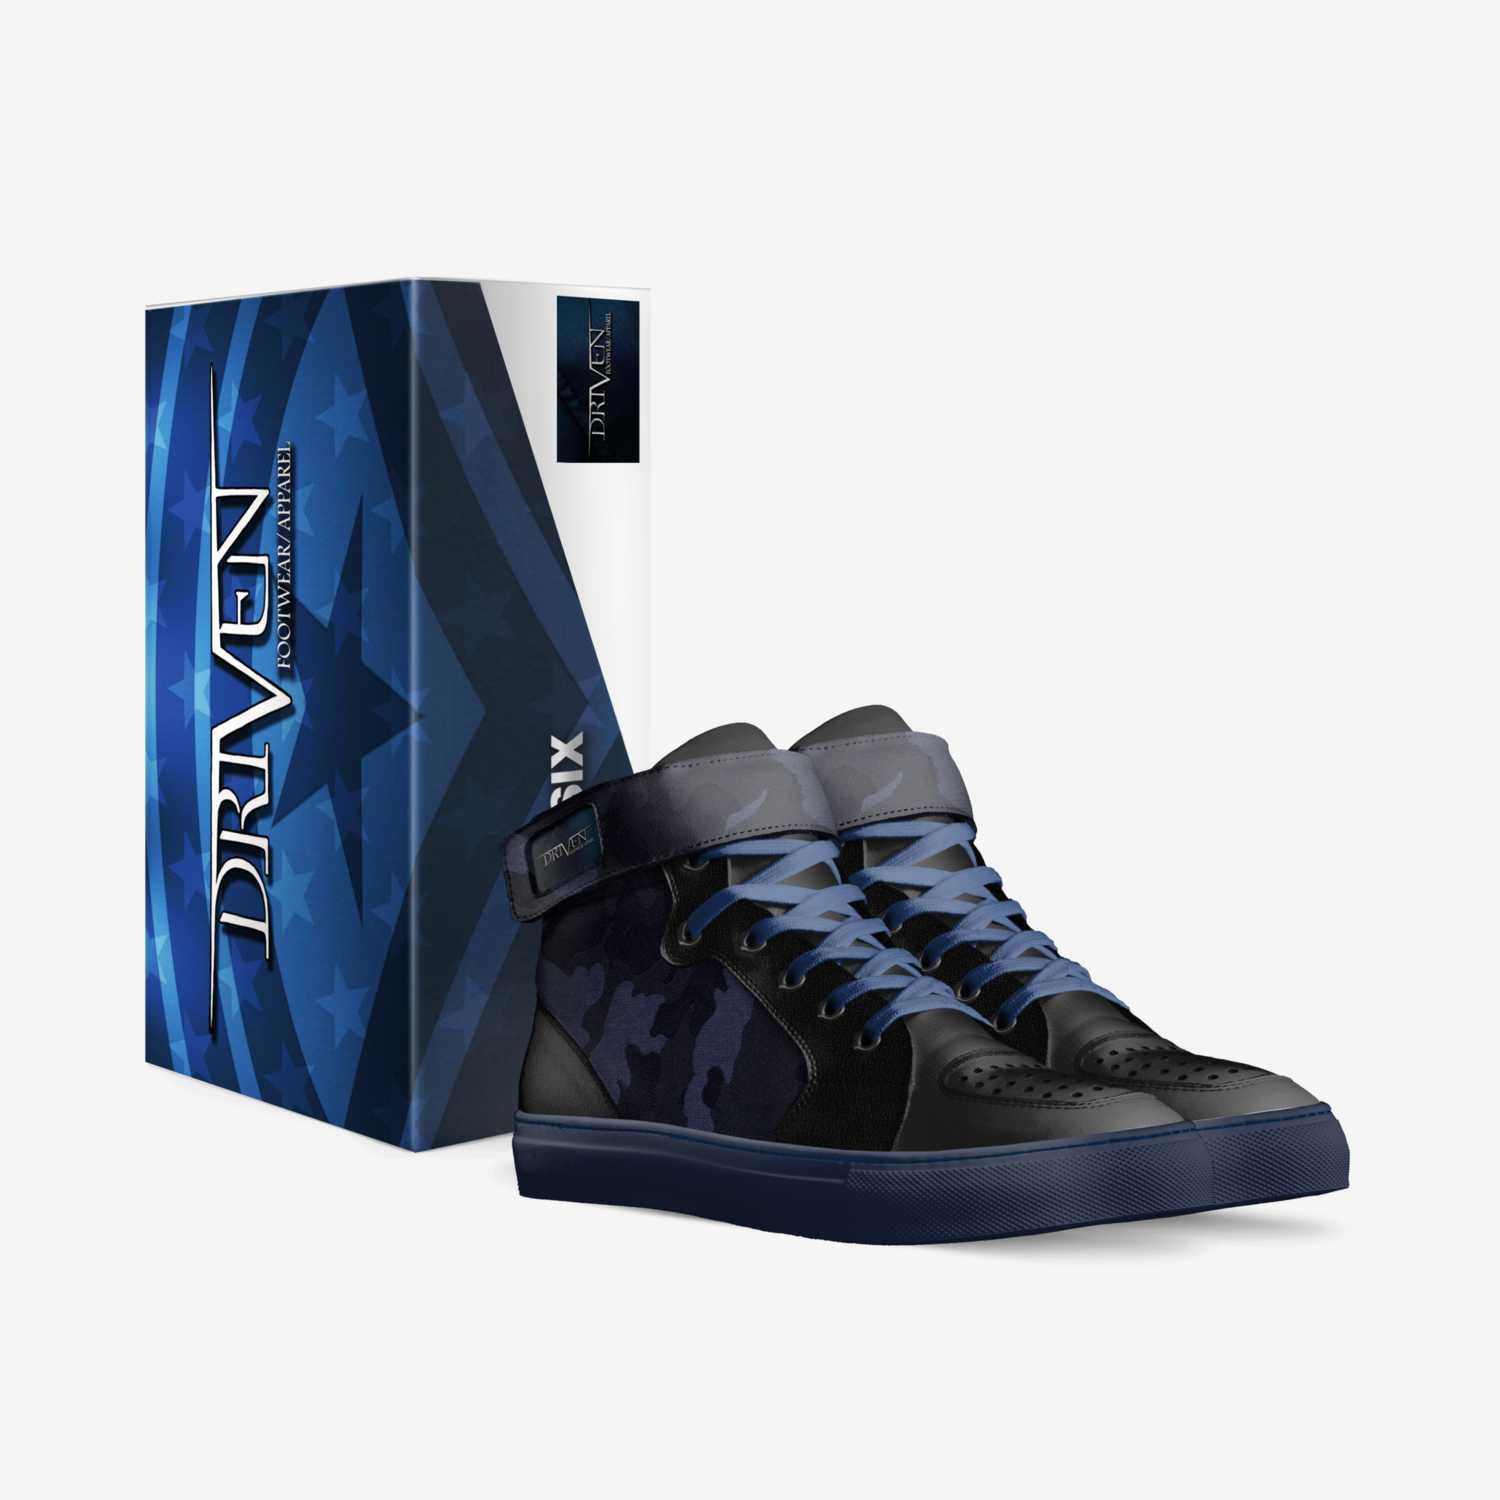 Driven Got Your 6 custom made in Italy shoes by Jason Oberly | Box view